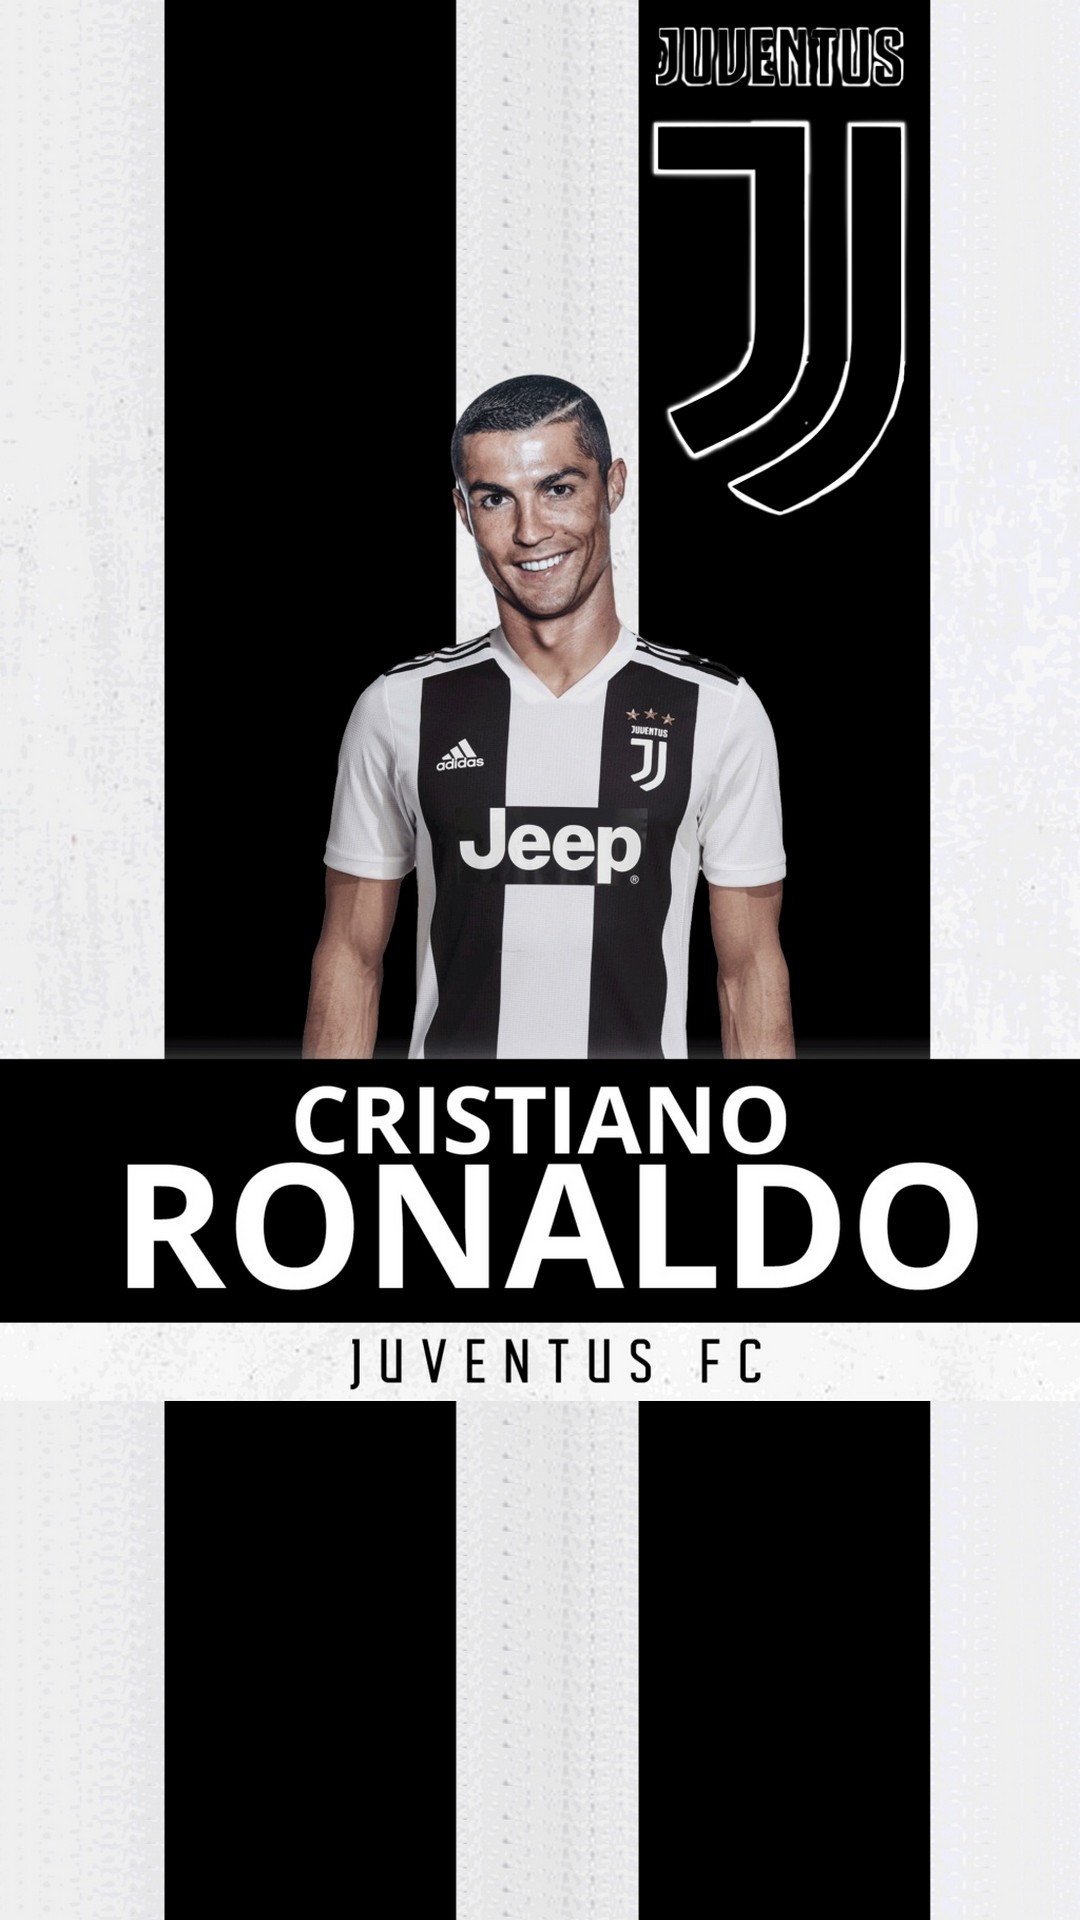 Wallpaper Mobile Cristiano Ronaldo Juventus With Resolution 1080X1920 pixel. You can make this wallpaper for your Mac or Windows Desktop Background, iPhone, Android or Tablet and another Smartphone device for free